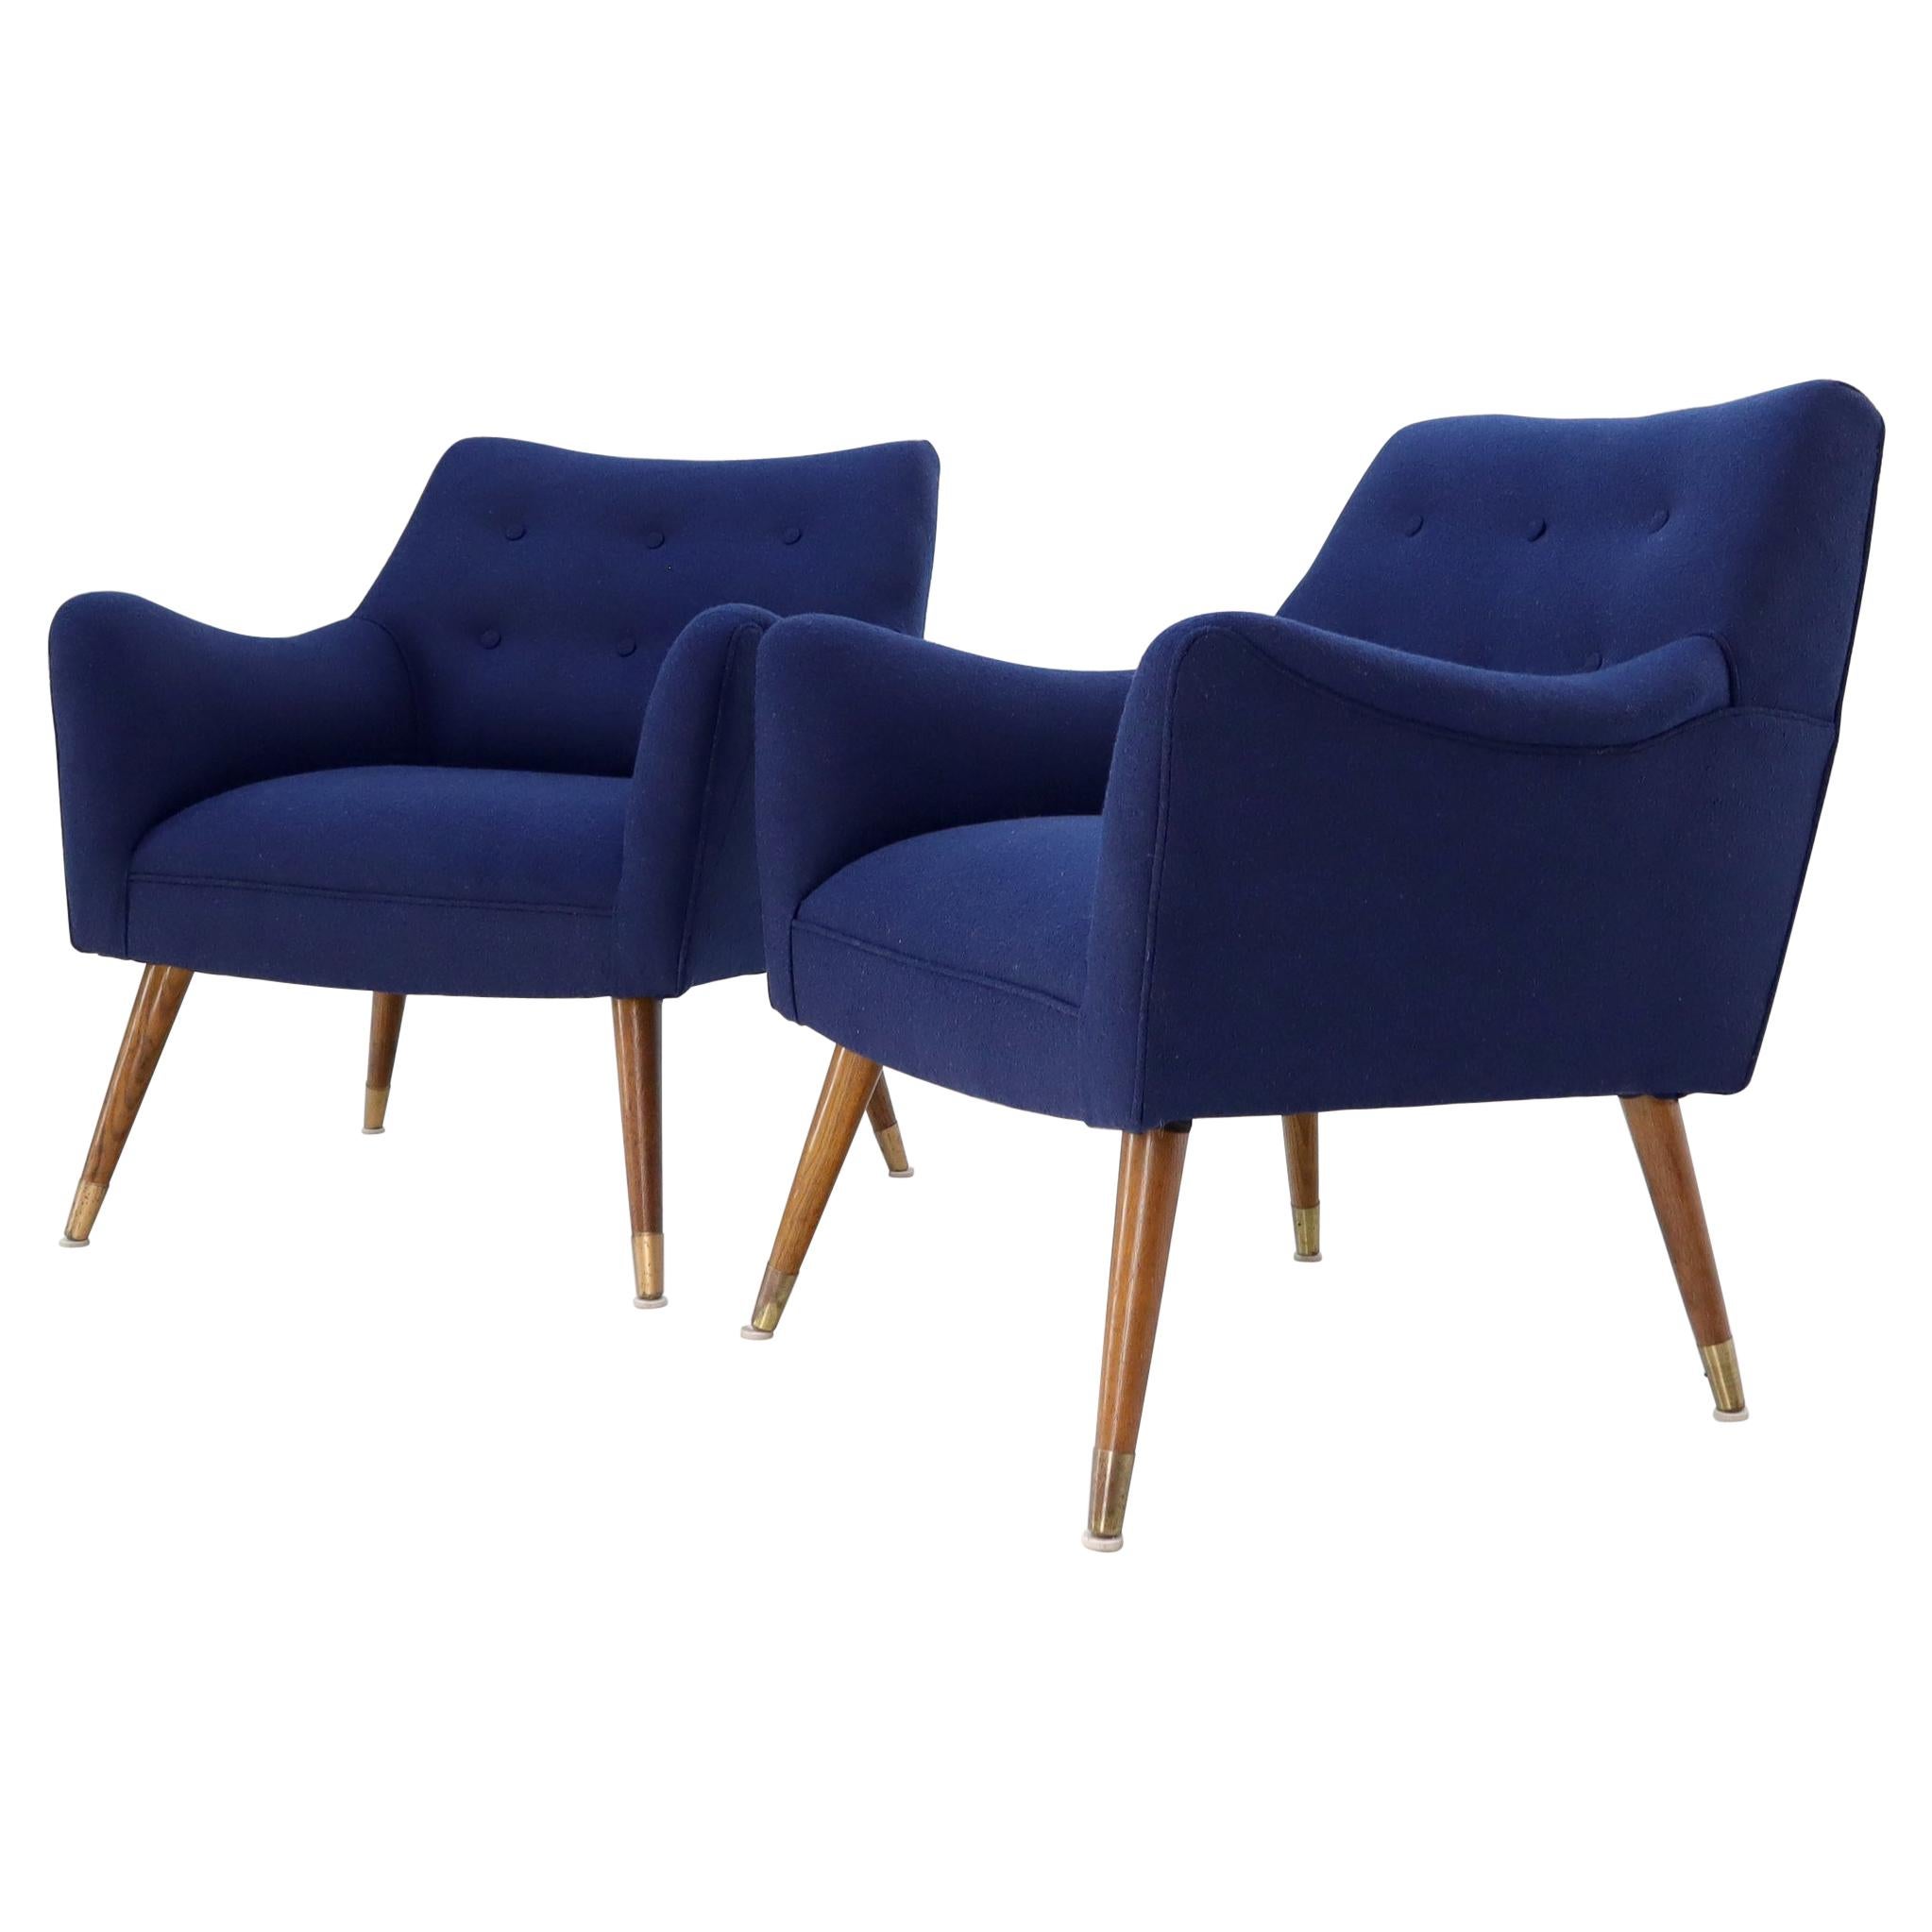 Pair of Navy Blue Mid-Century Modern Lounge Arm Chairs on Tapered Dowel Legs For Sale